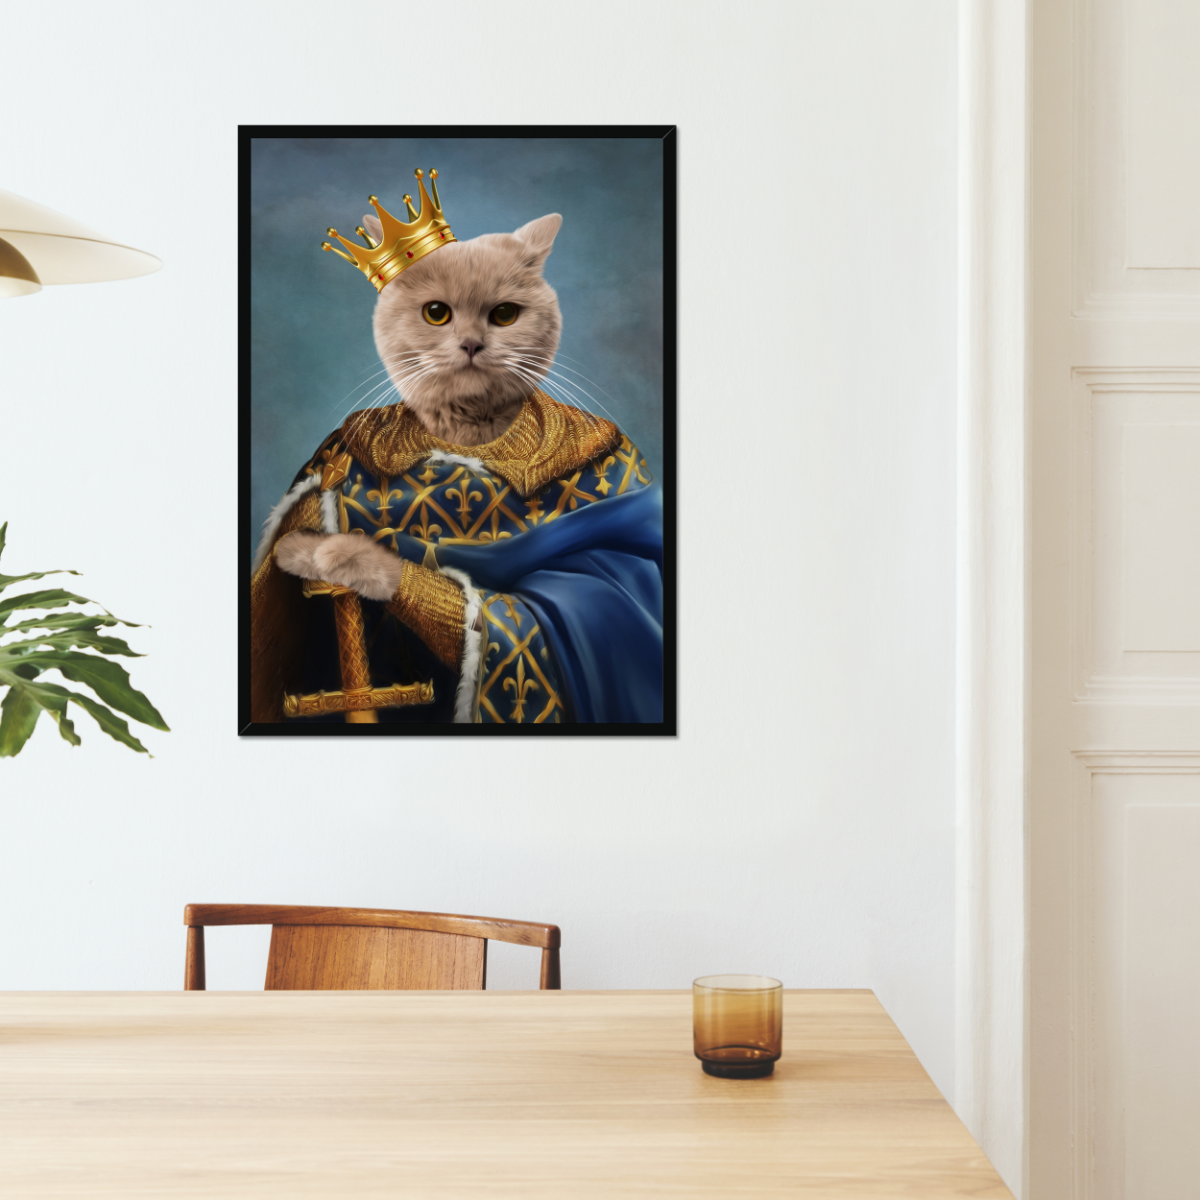 The Golden King: Custom Pet Portrait - Paw & Glory, paw and glory, personal pet portrait, puppy prints, victorian dog portrait, 50th wedding anniversary gifts, dog painting royalty, dog and cat paintings, pet portrait